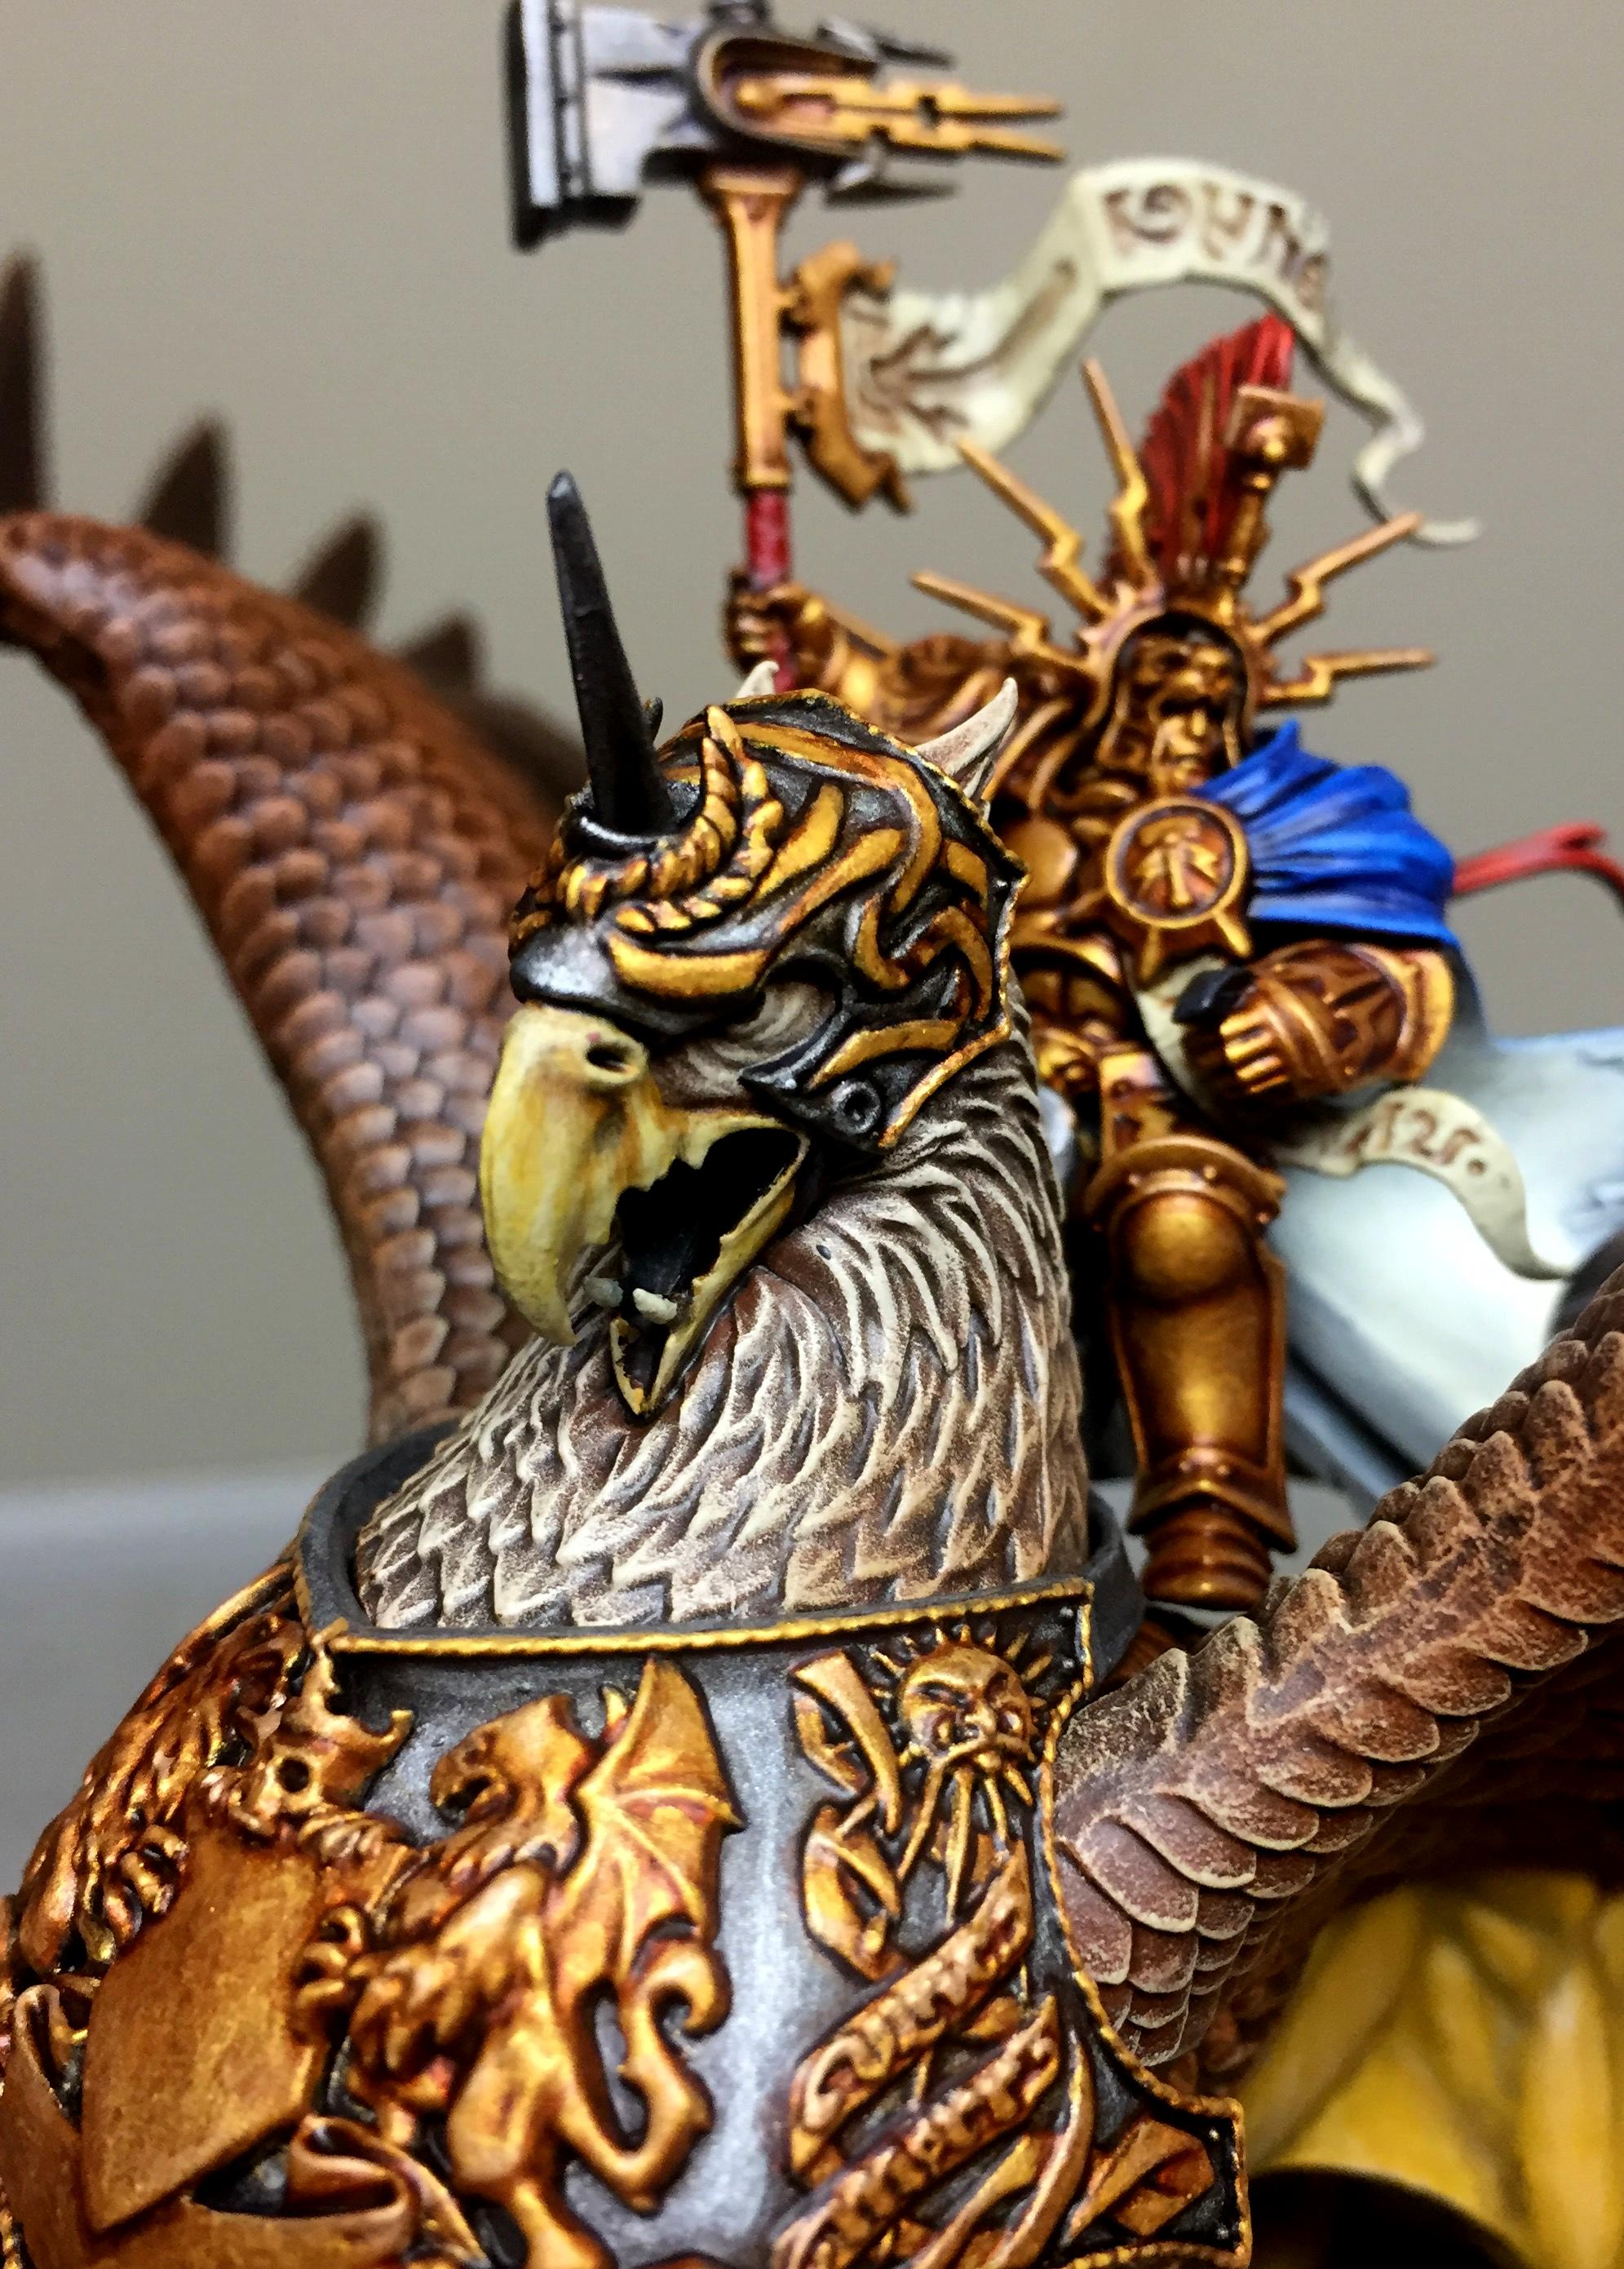 Lord Celestant on Griffin